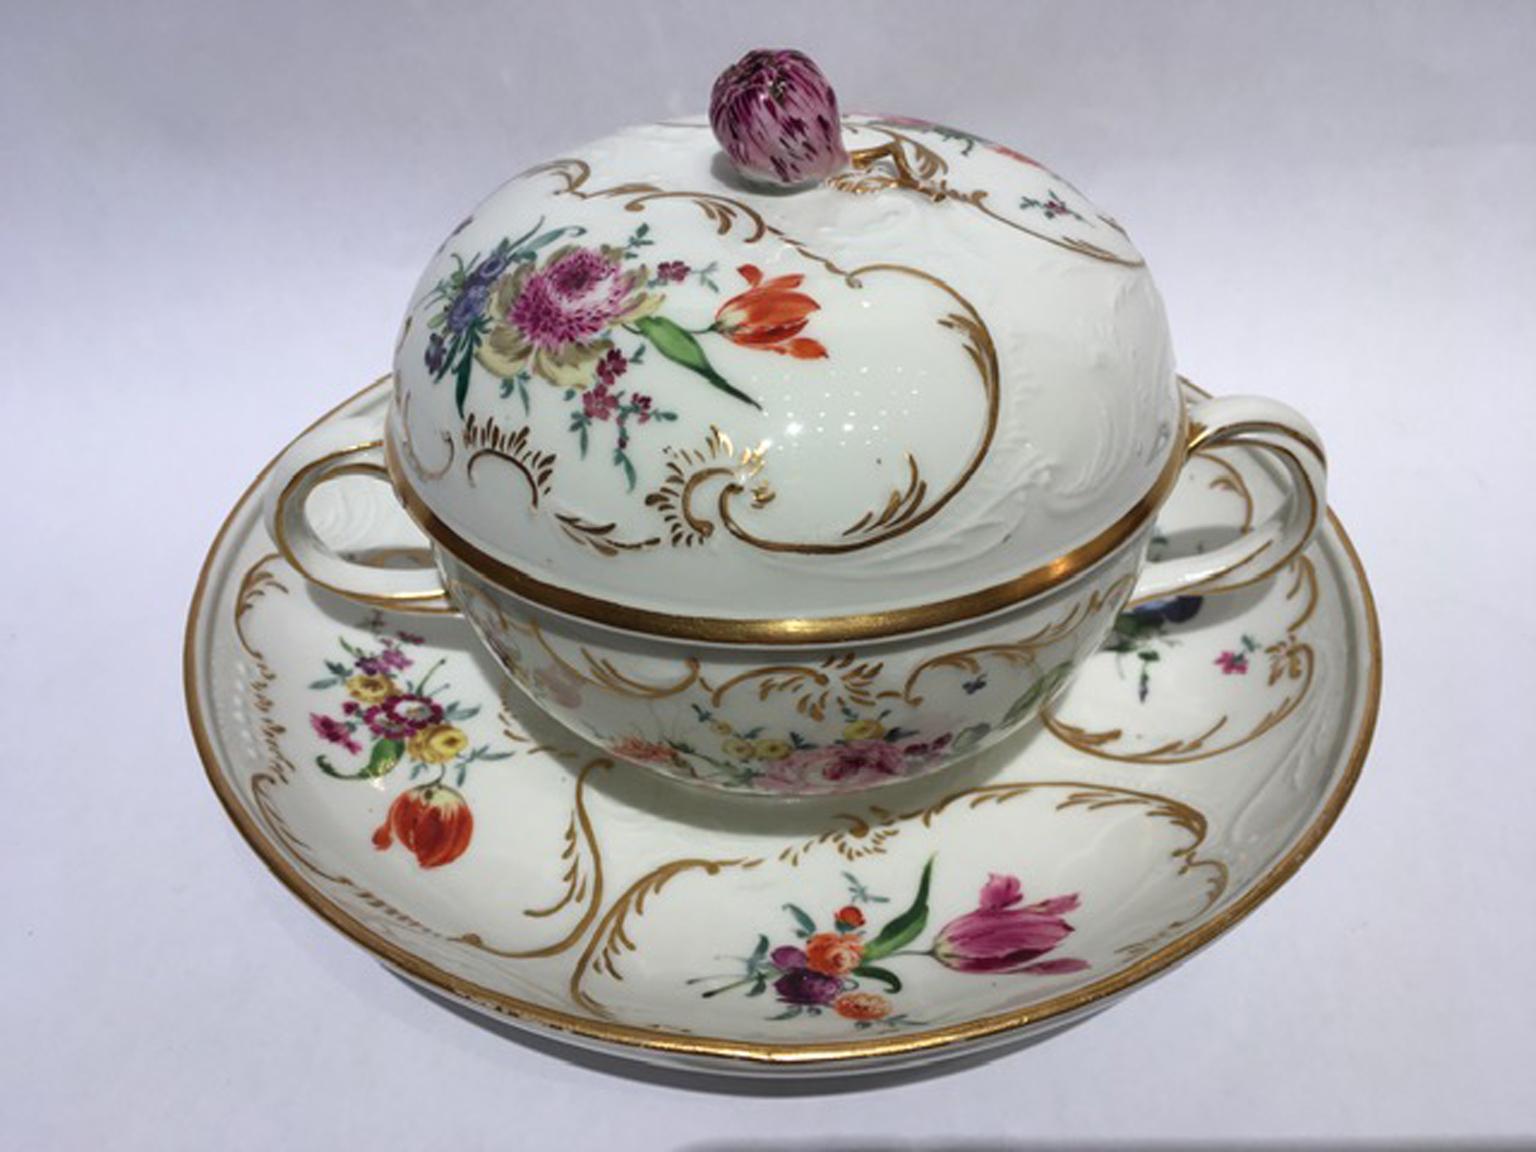 This is a small Meissen masterpiece of craftsmanship: the fine porcelain is designed with floral and natural scenes, rich in detail.
A piece for refined collectors or useful to start a collection

Marked on the back
In perfect conditions
With